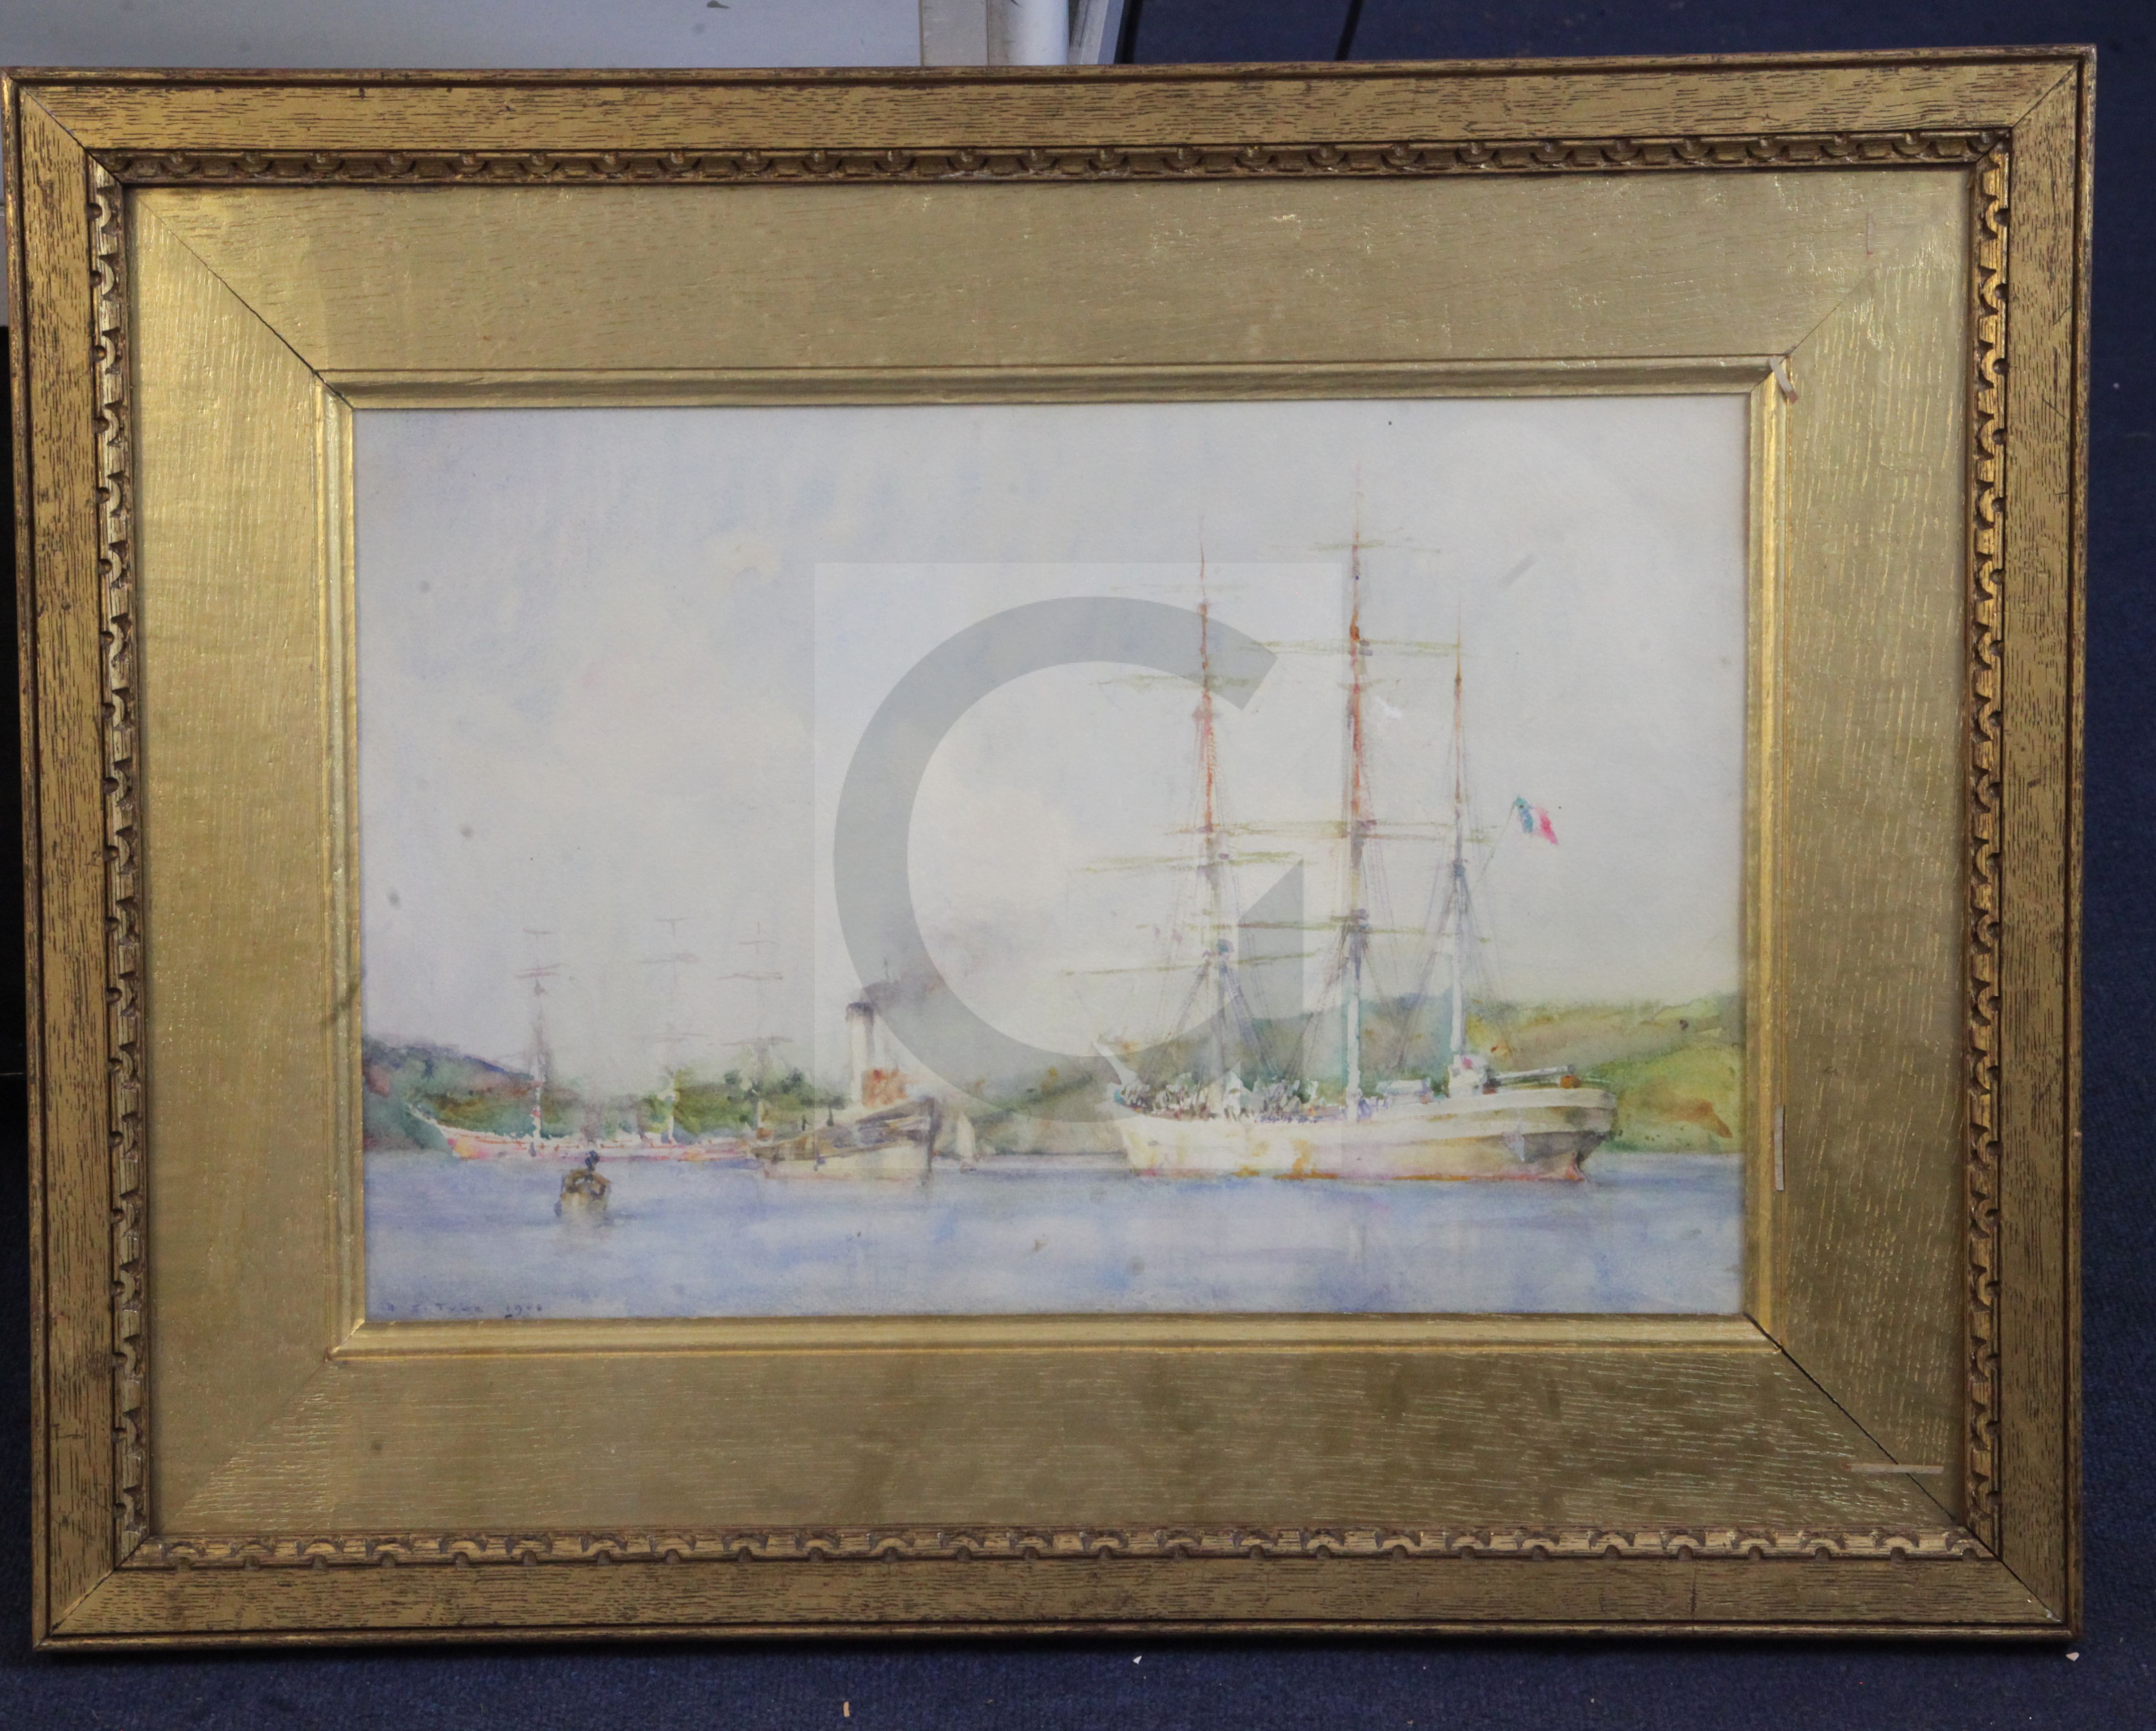 Henry Scott Tuke (1858-1929)watercolourFrench shipping in harboursigned and dated 190812 x 18in. - Image 2 of 5